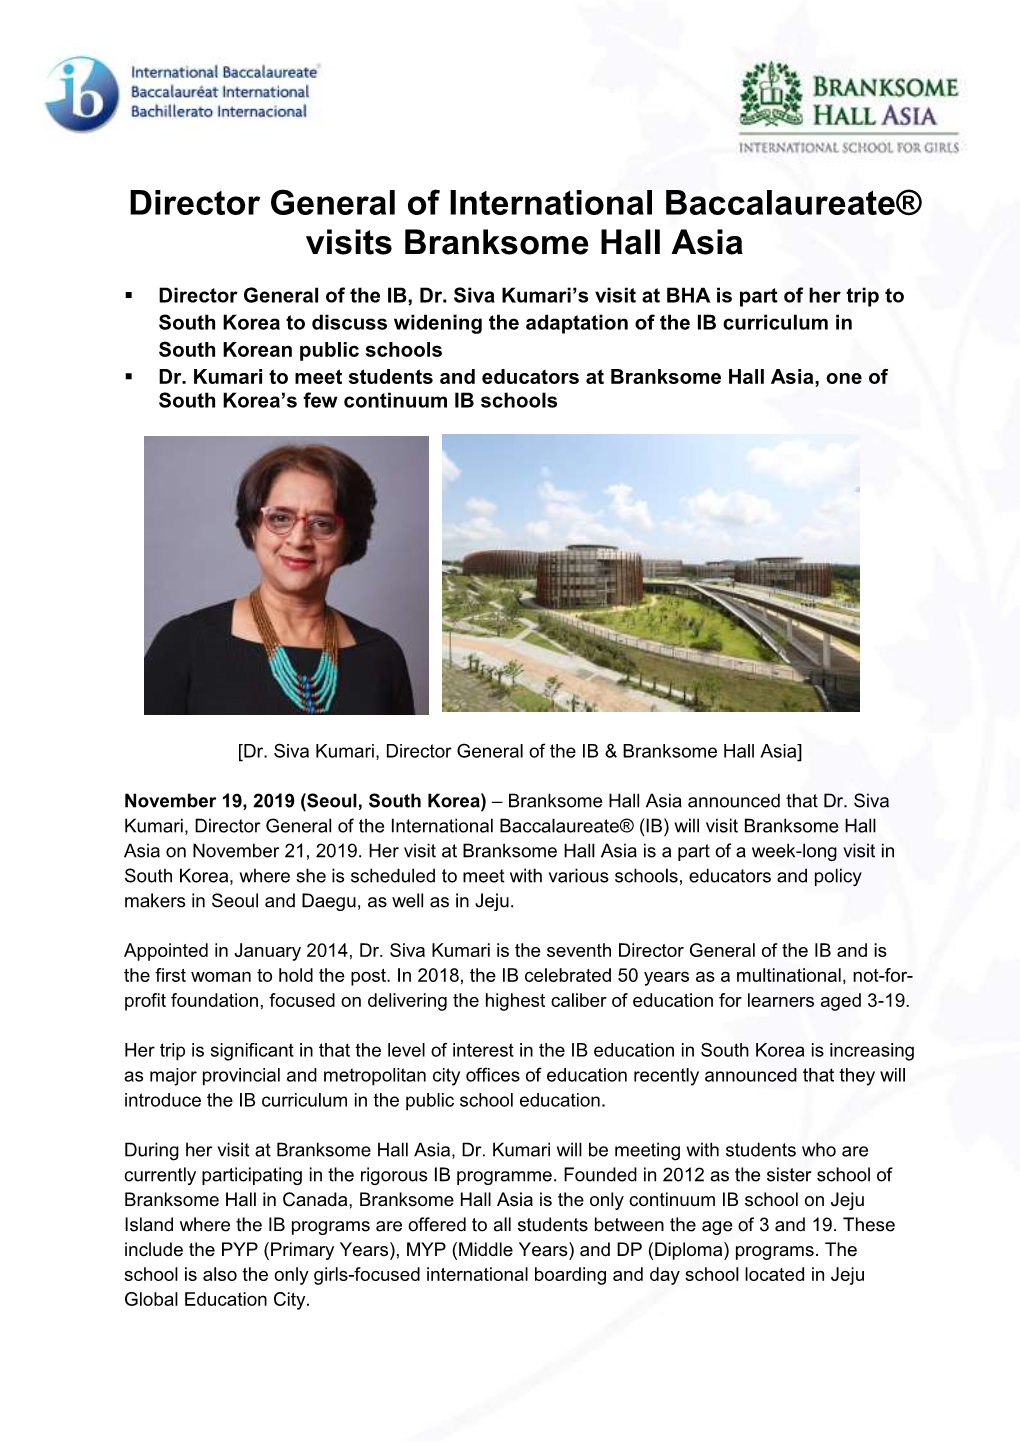 Director General of International Baccalaureate® Visits Branksome Hall Asia